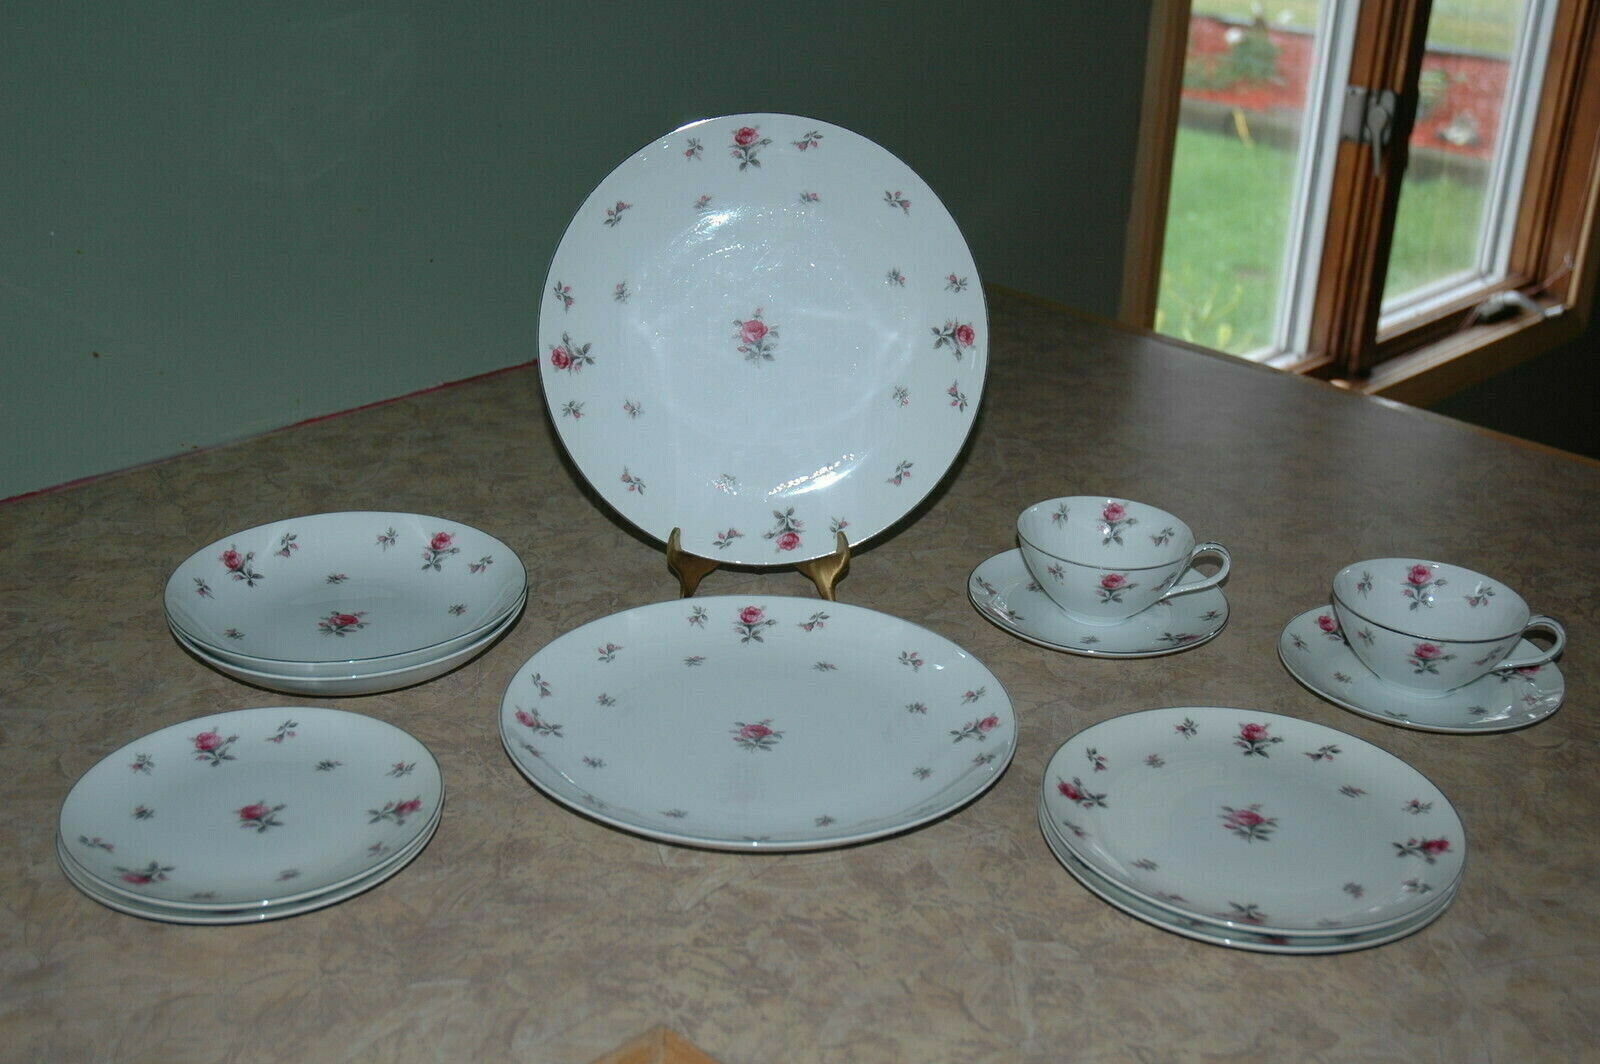 Set of eight Rosechintz by Meito fine china dinner plates from Japan